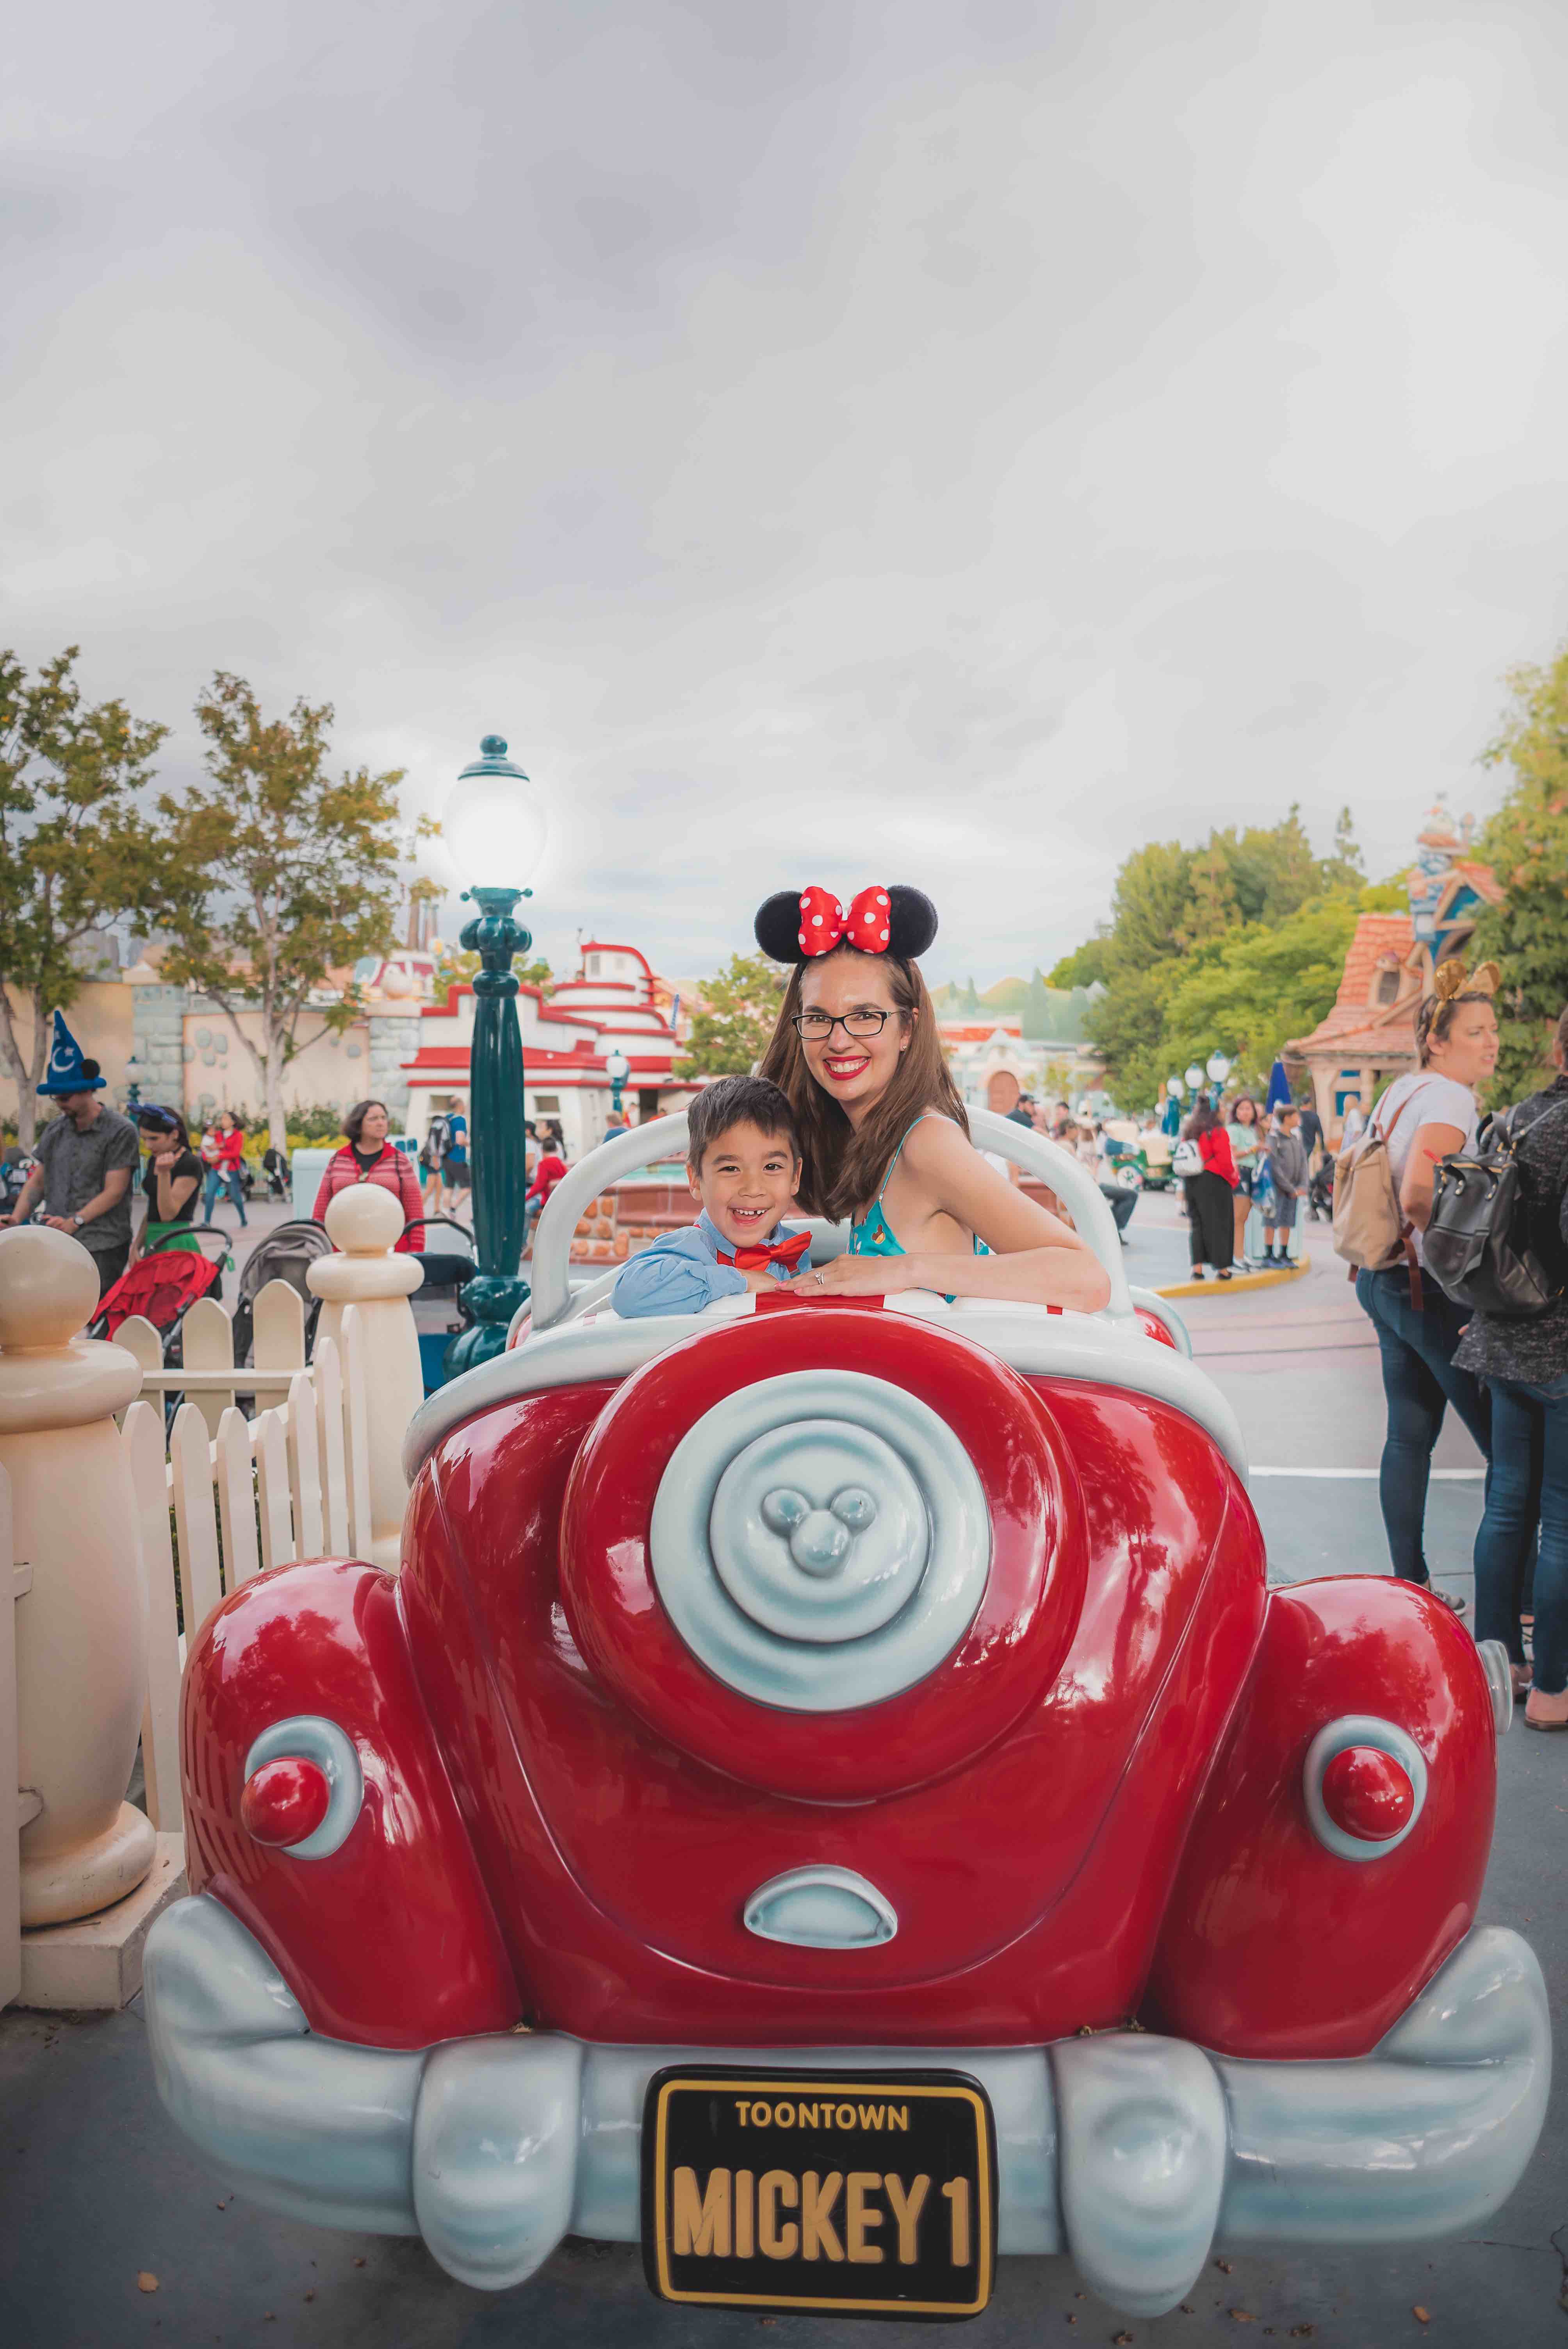 How Many Days Do you Need at Disneyland? Tips featured by top US Disney blogger, Marcie and the Mouse: Save money on your Disneyland vacation package